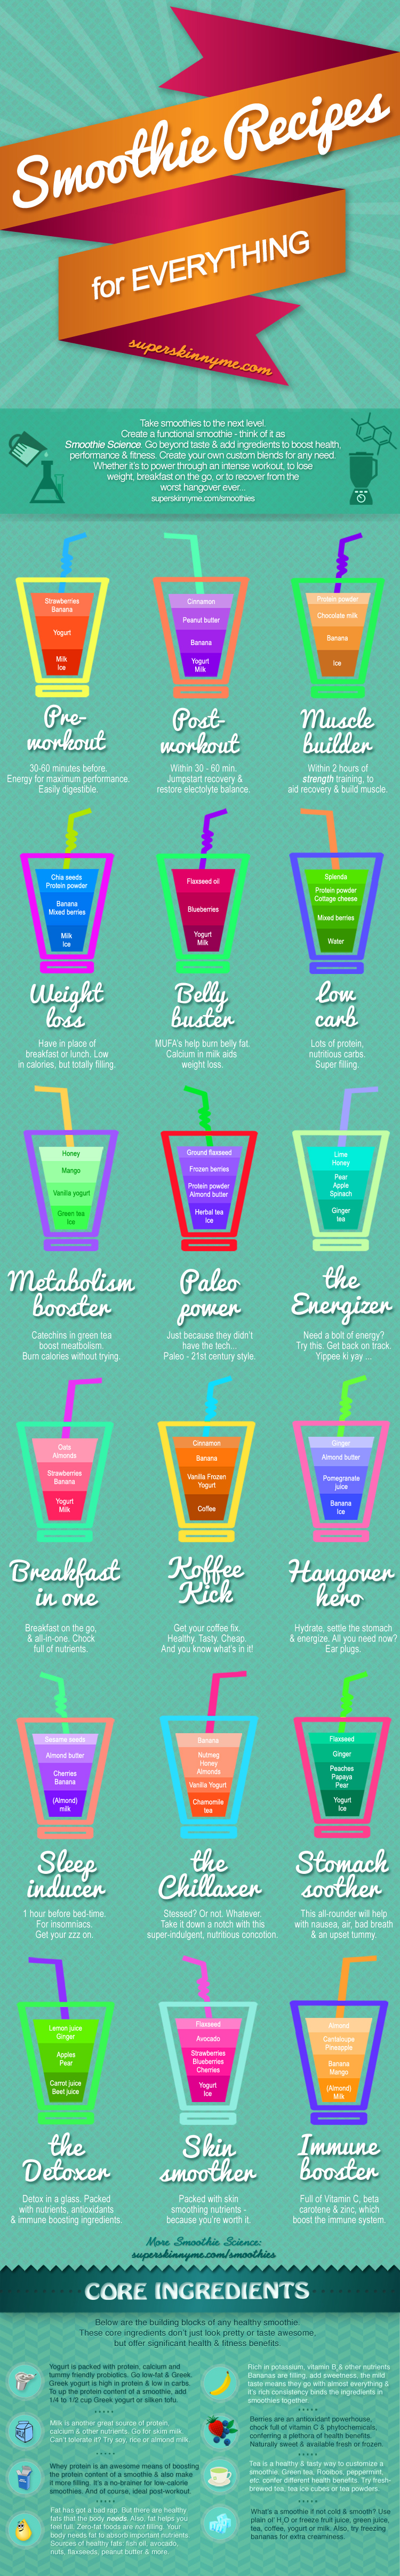 Excellent Smoothie Recipes For Any Occasion Infographic